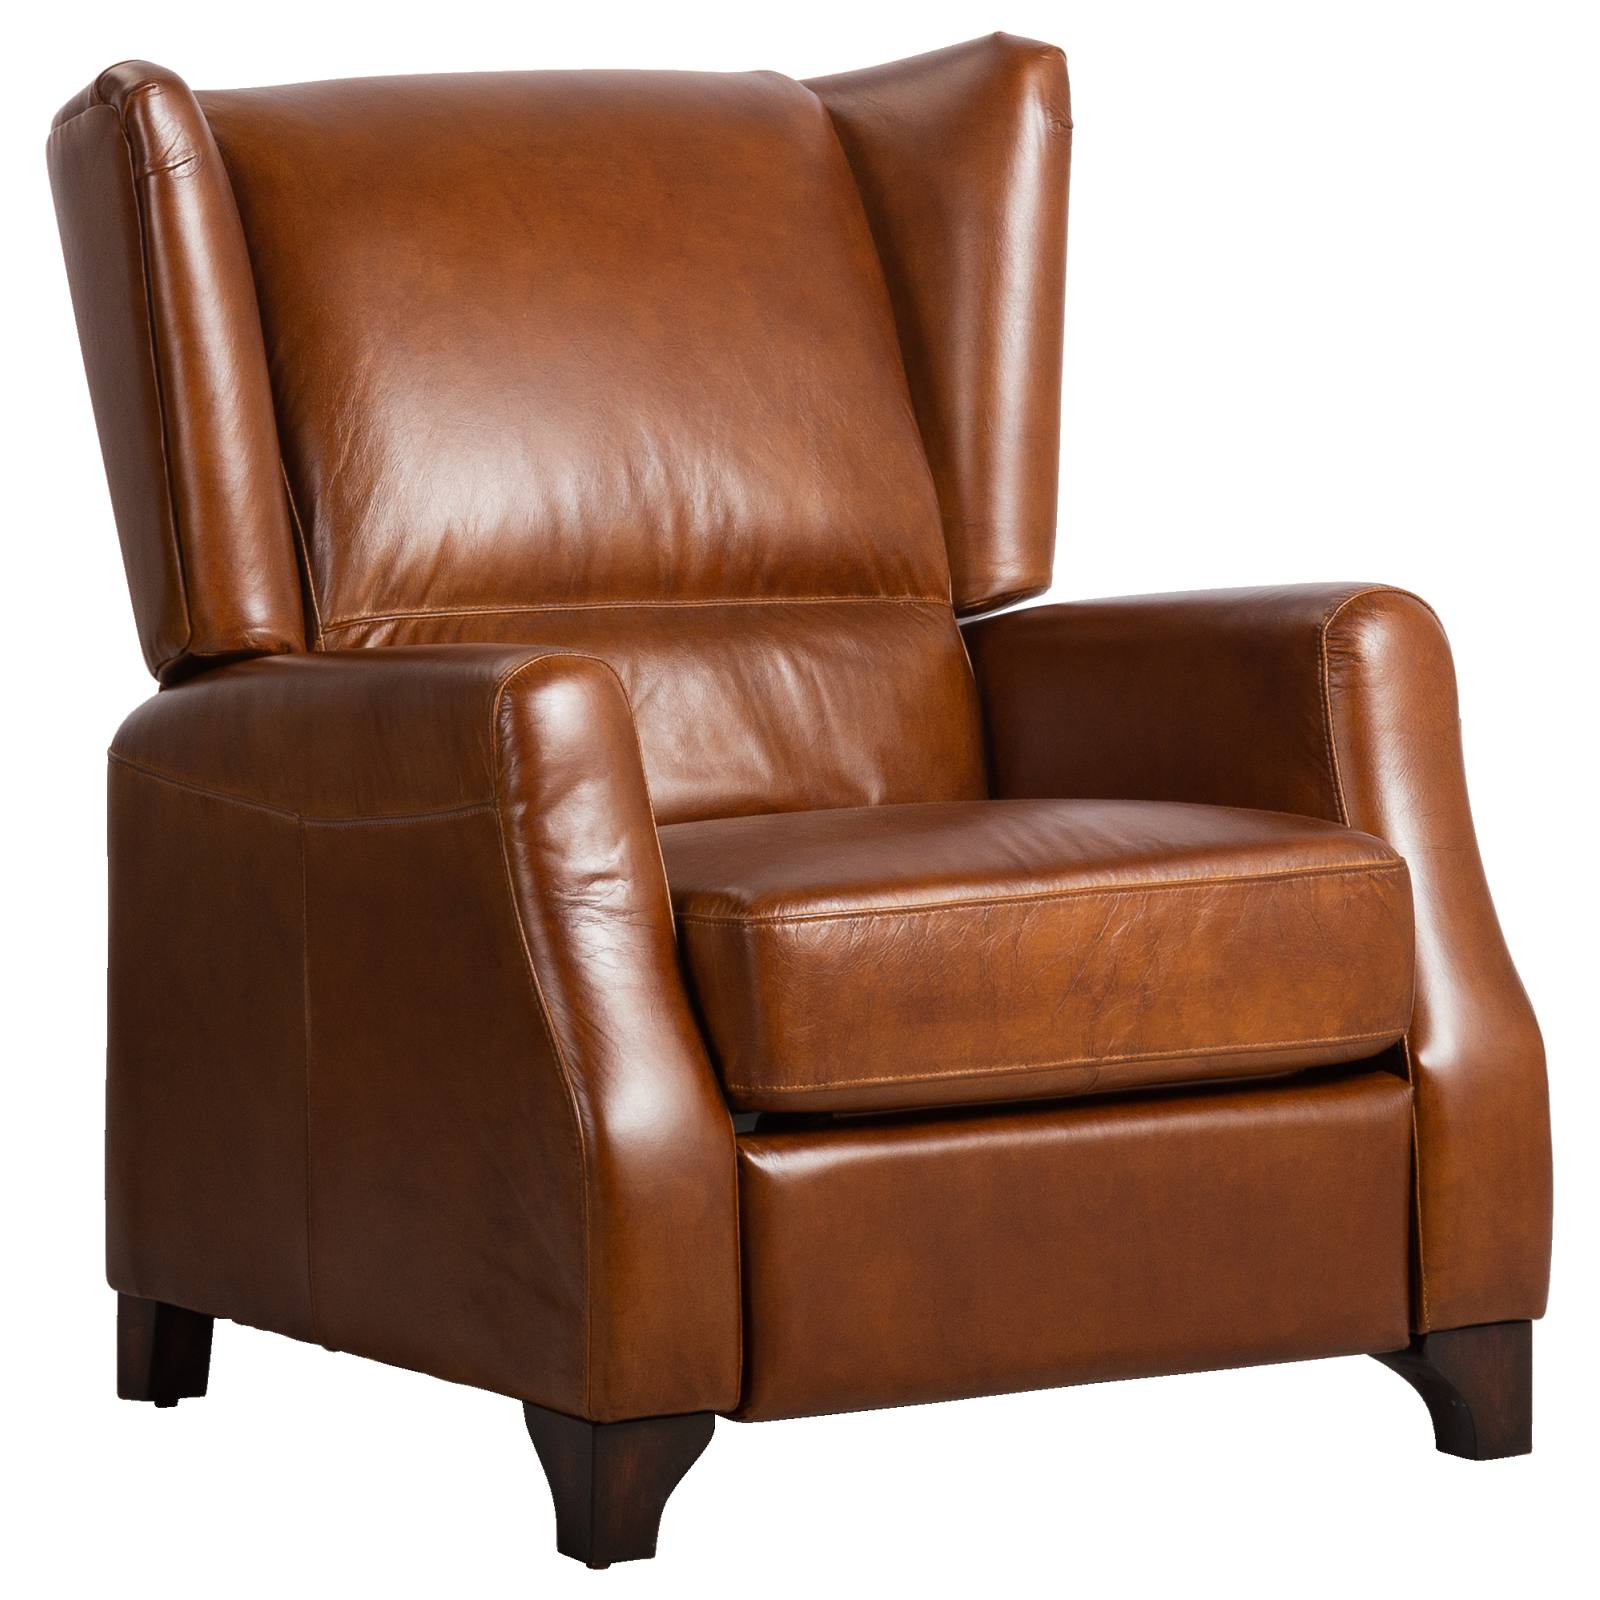 Talman Reclining Leather Chair Havana, Leather Lounge Chairs Recliners